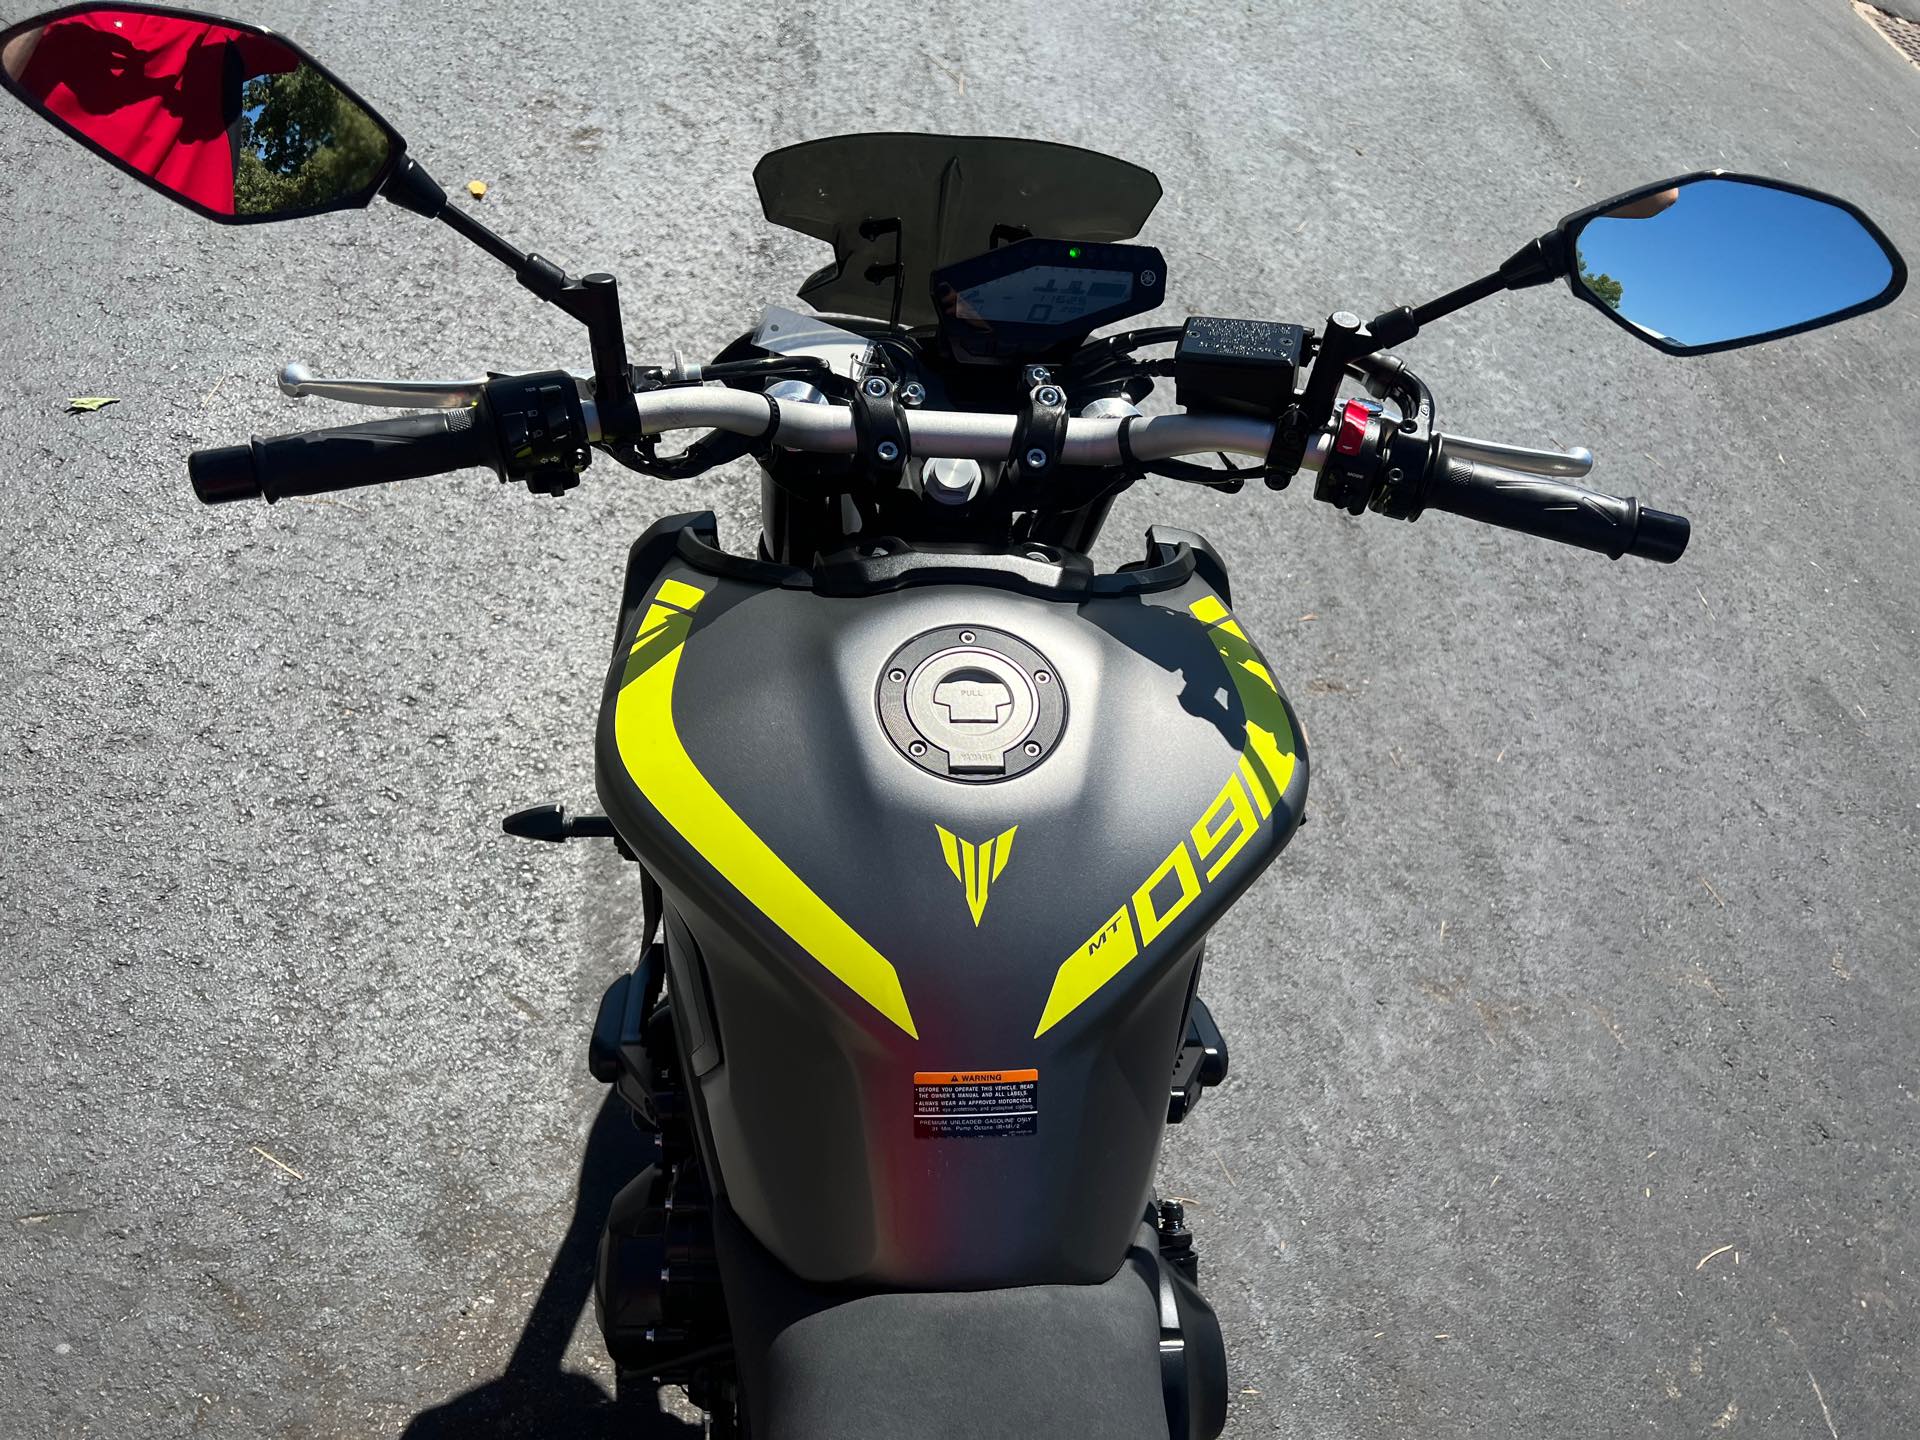 2018 Yamaha MT 09 at Aces Motorcycles - Fort Collins